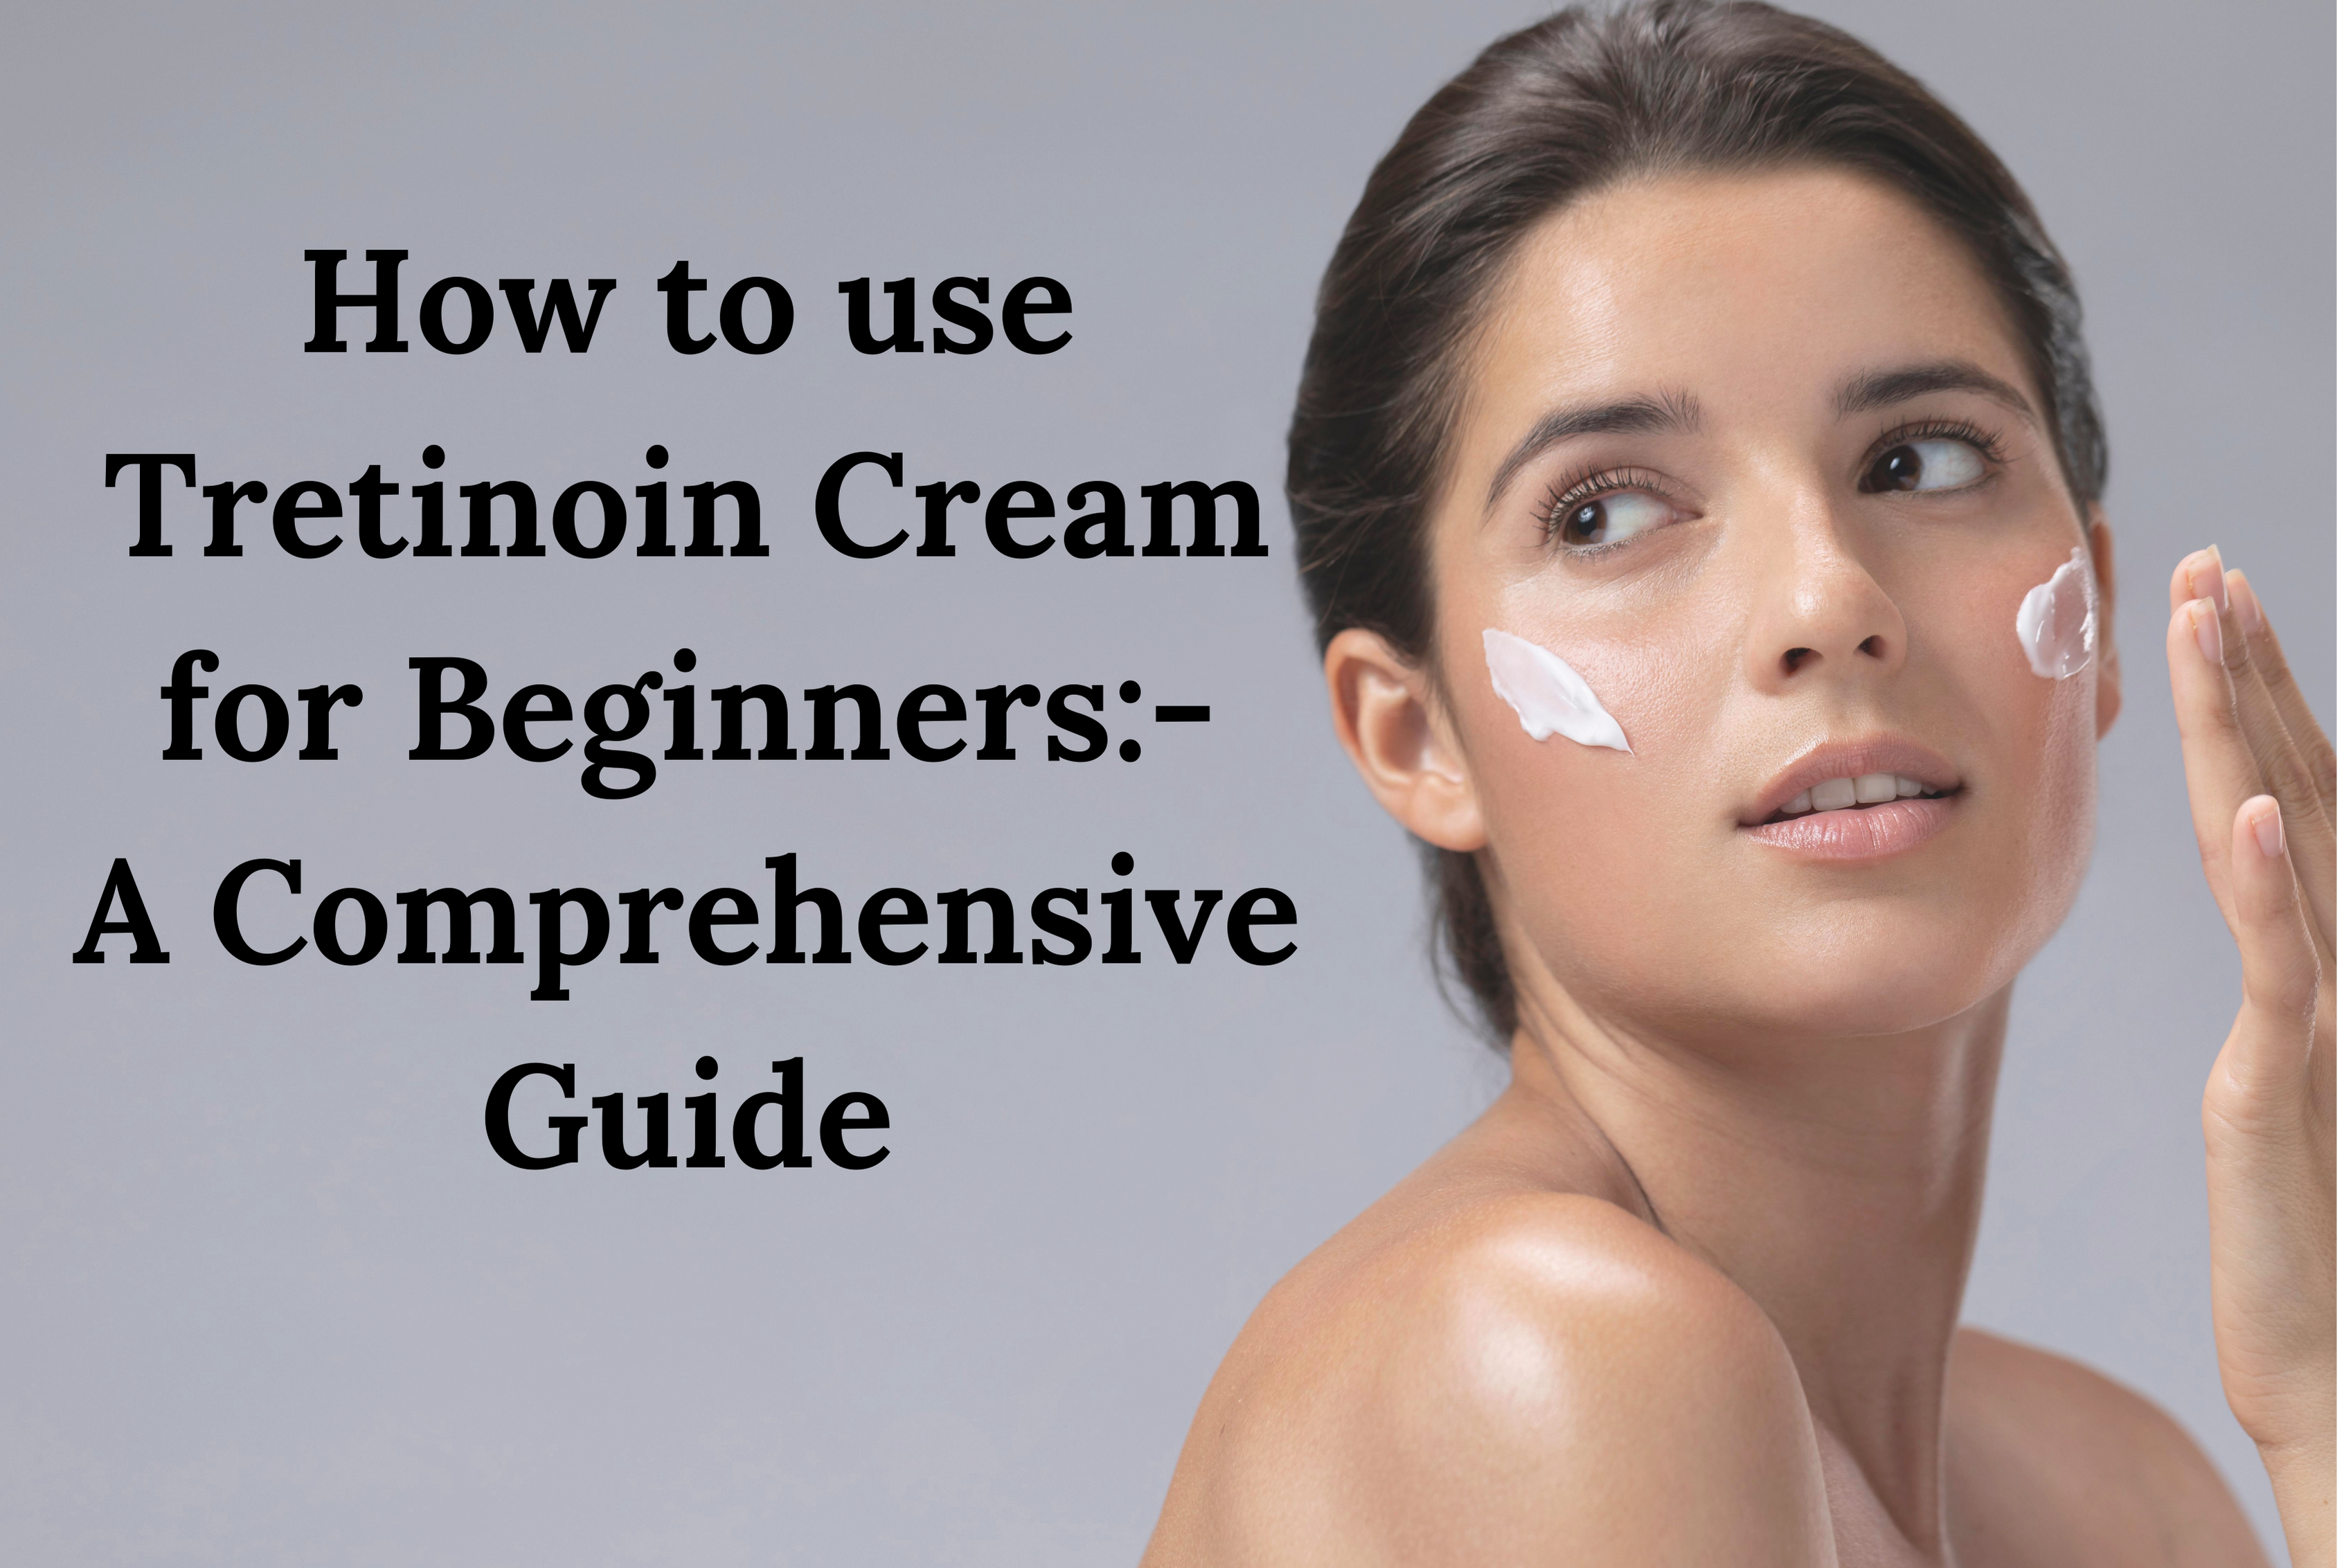 How to use Tretinoin Cream For Beginners- A comprehensive Guide